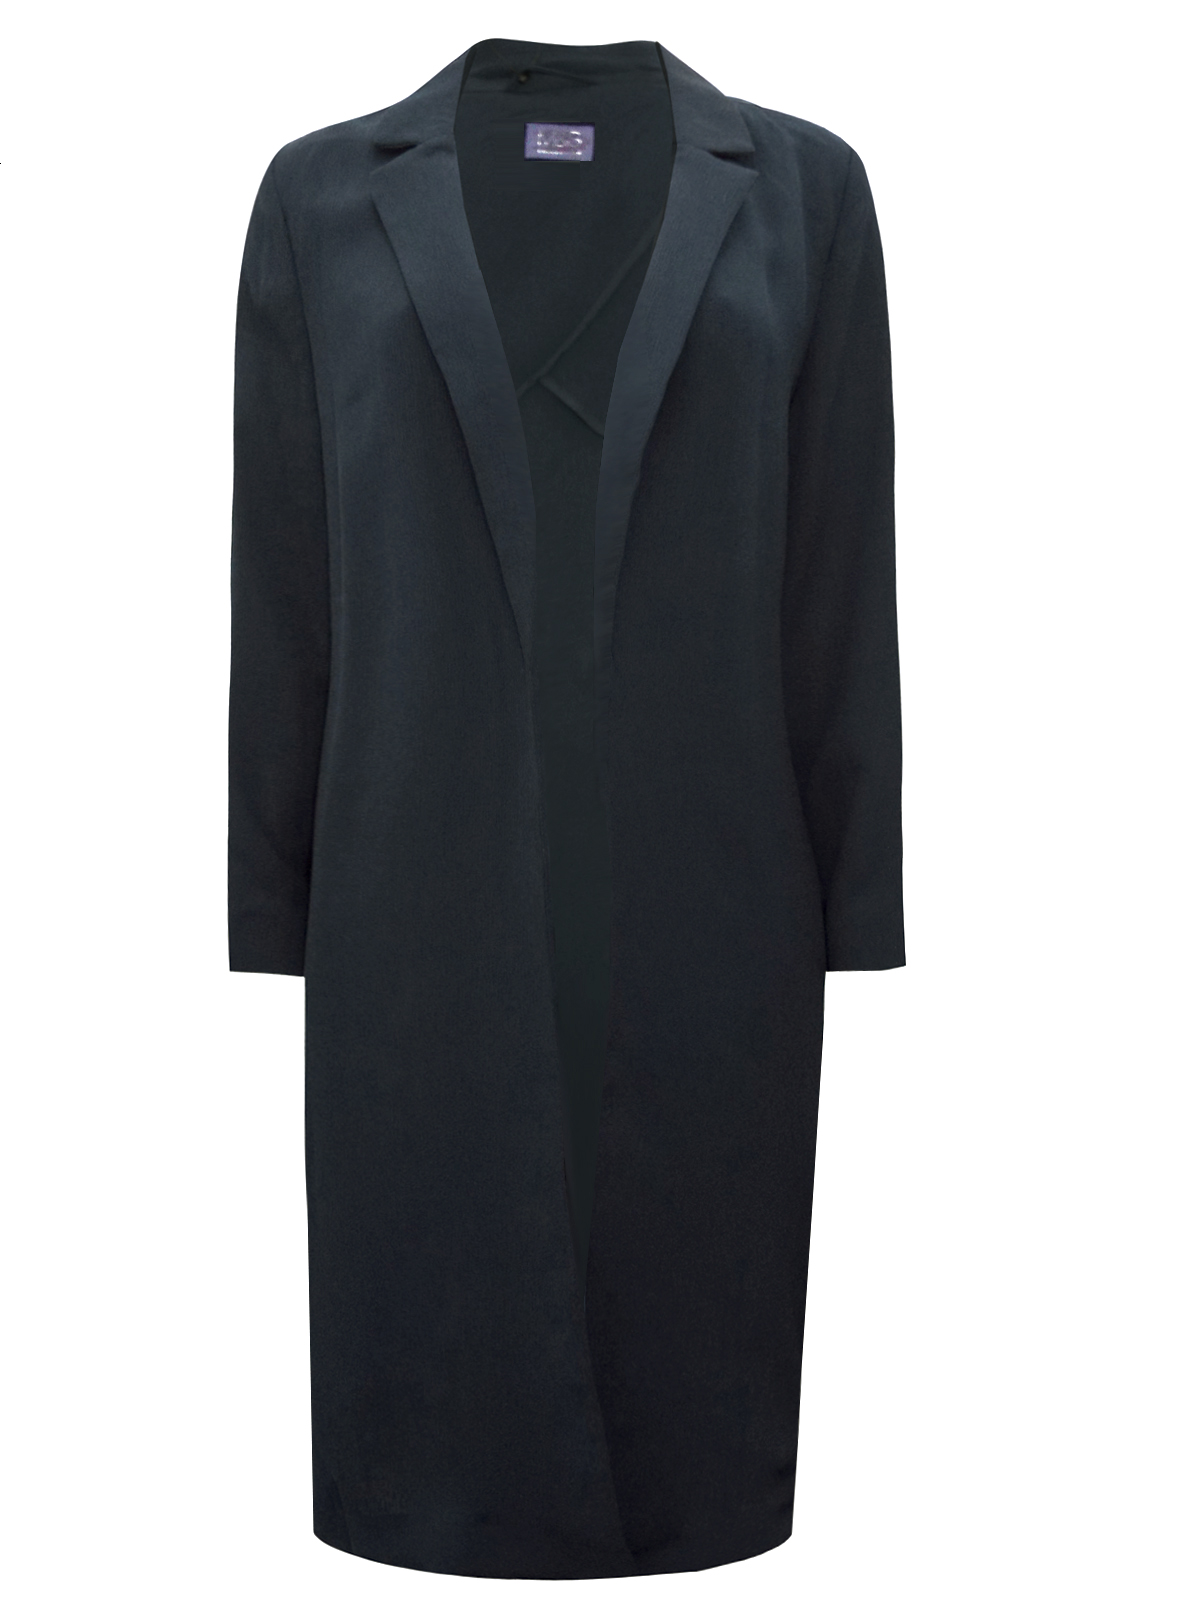 Marks and Spencer - - M&5 BLACK Longline Crepe Duster Jacket - Size 14 to 22